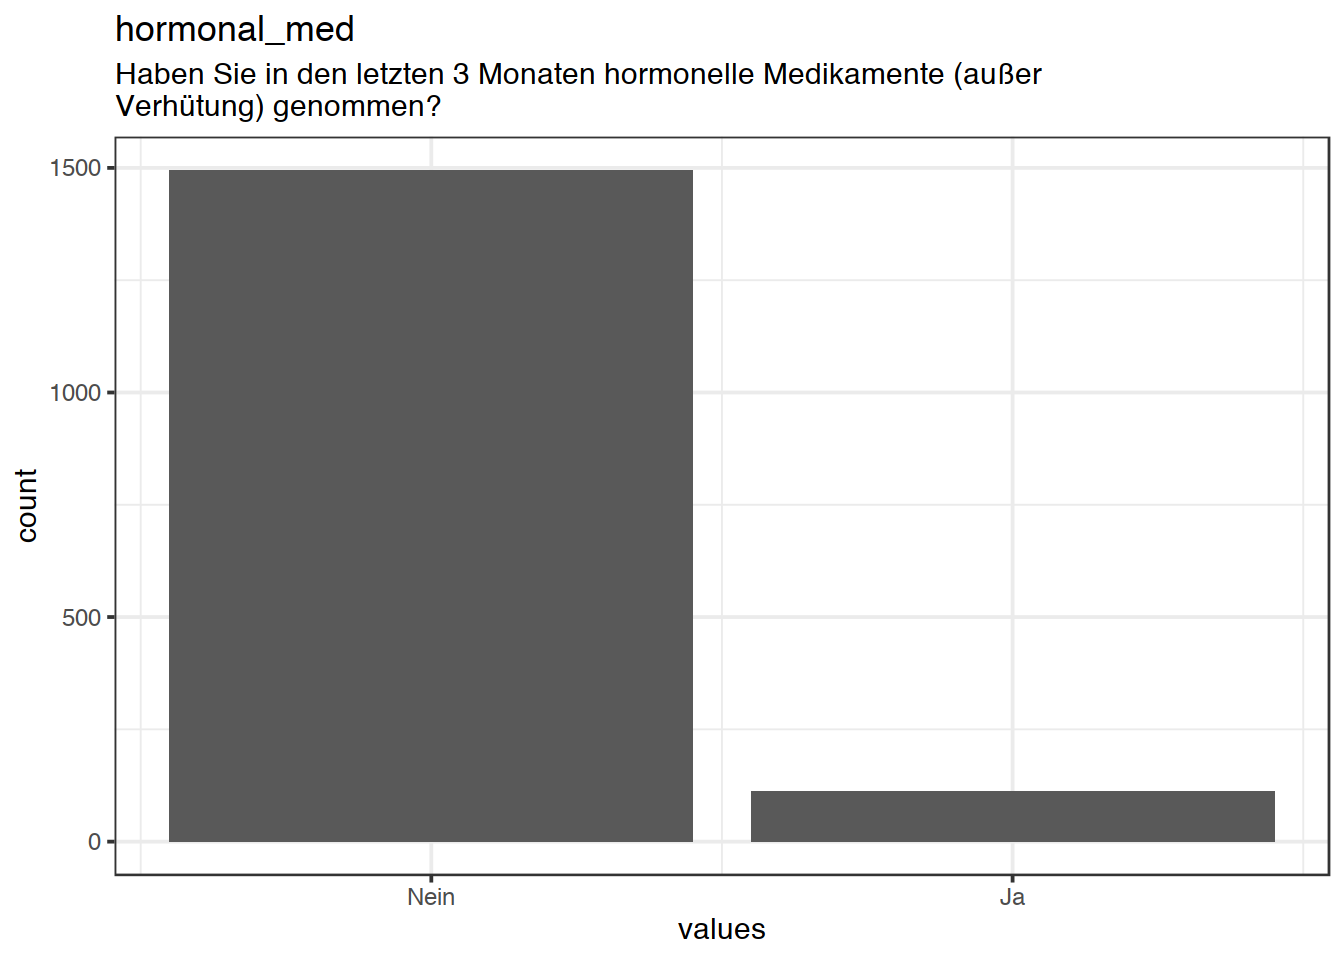 Distribution of values for hormonal_med